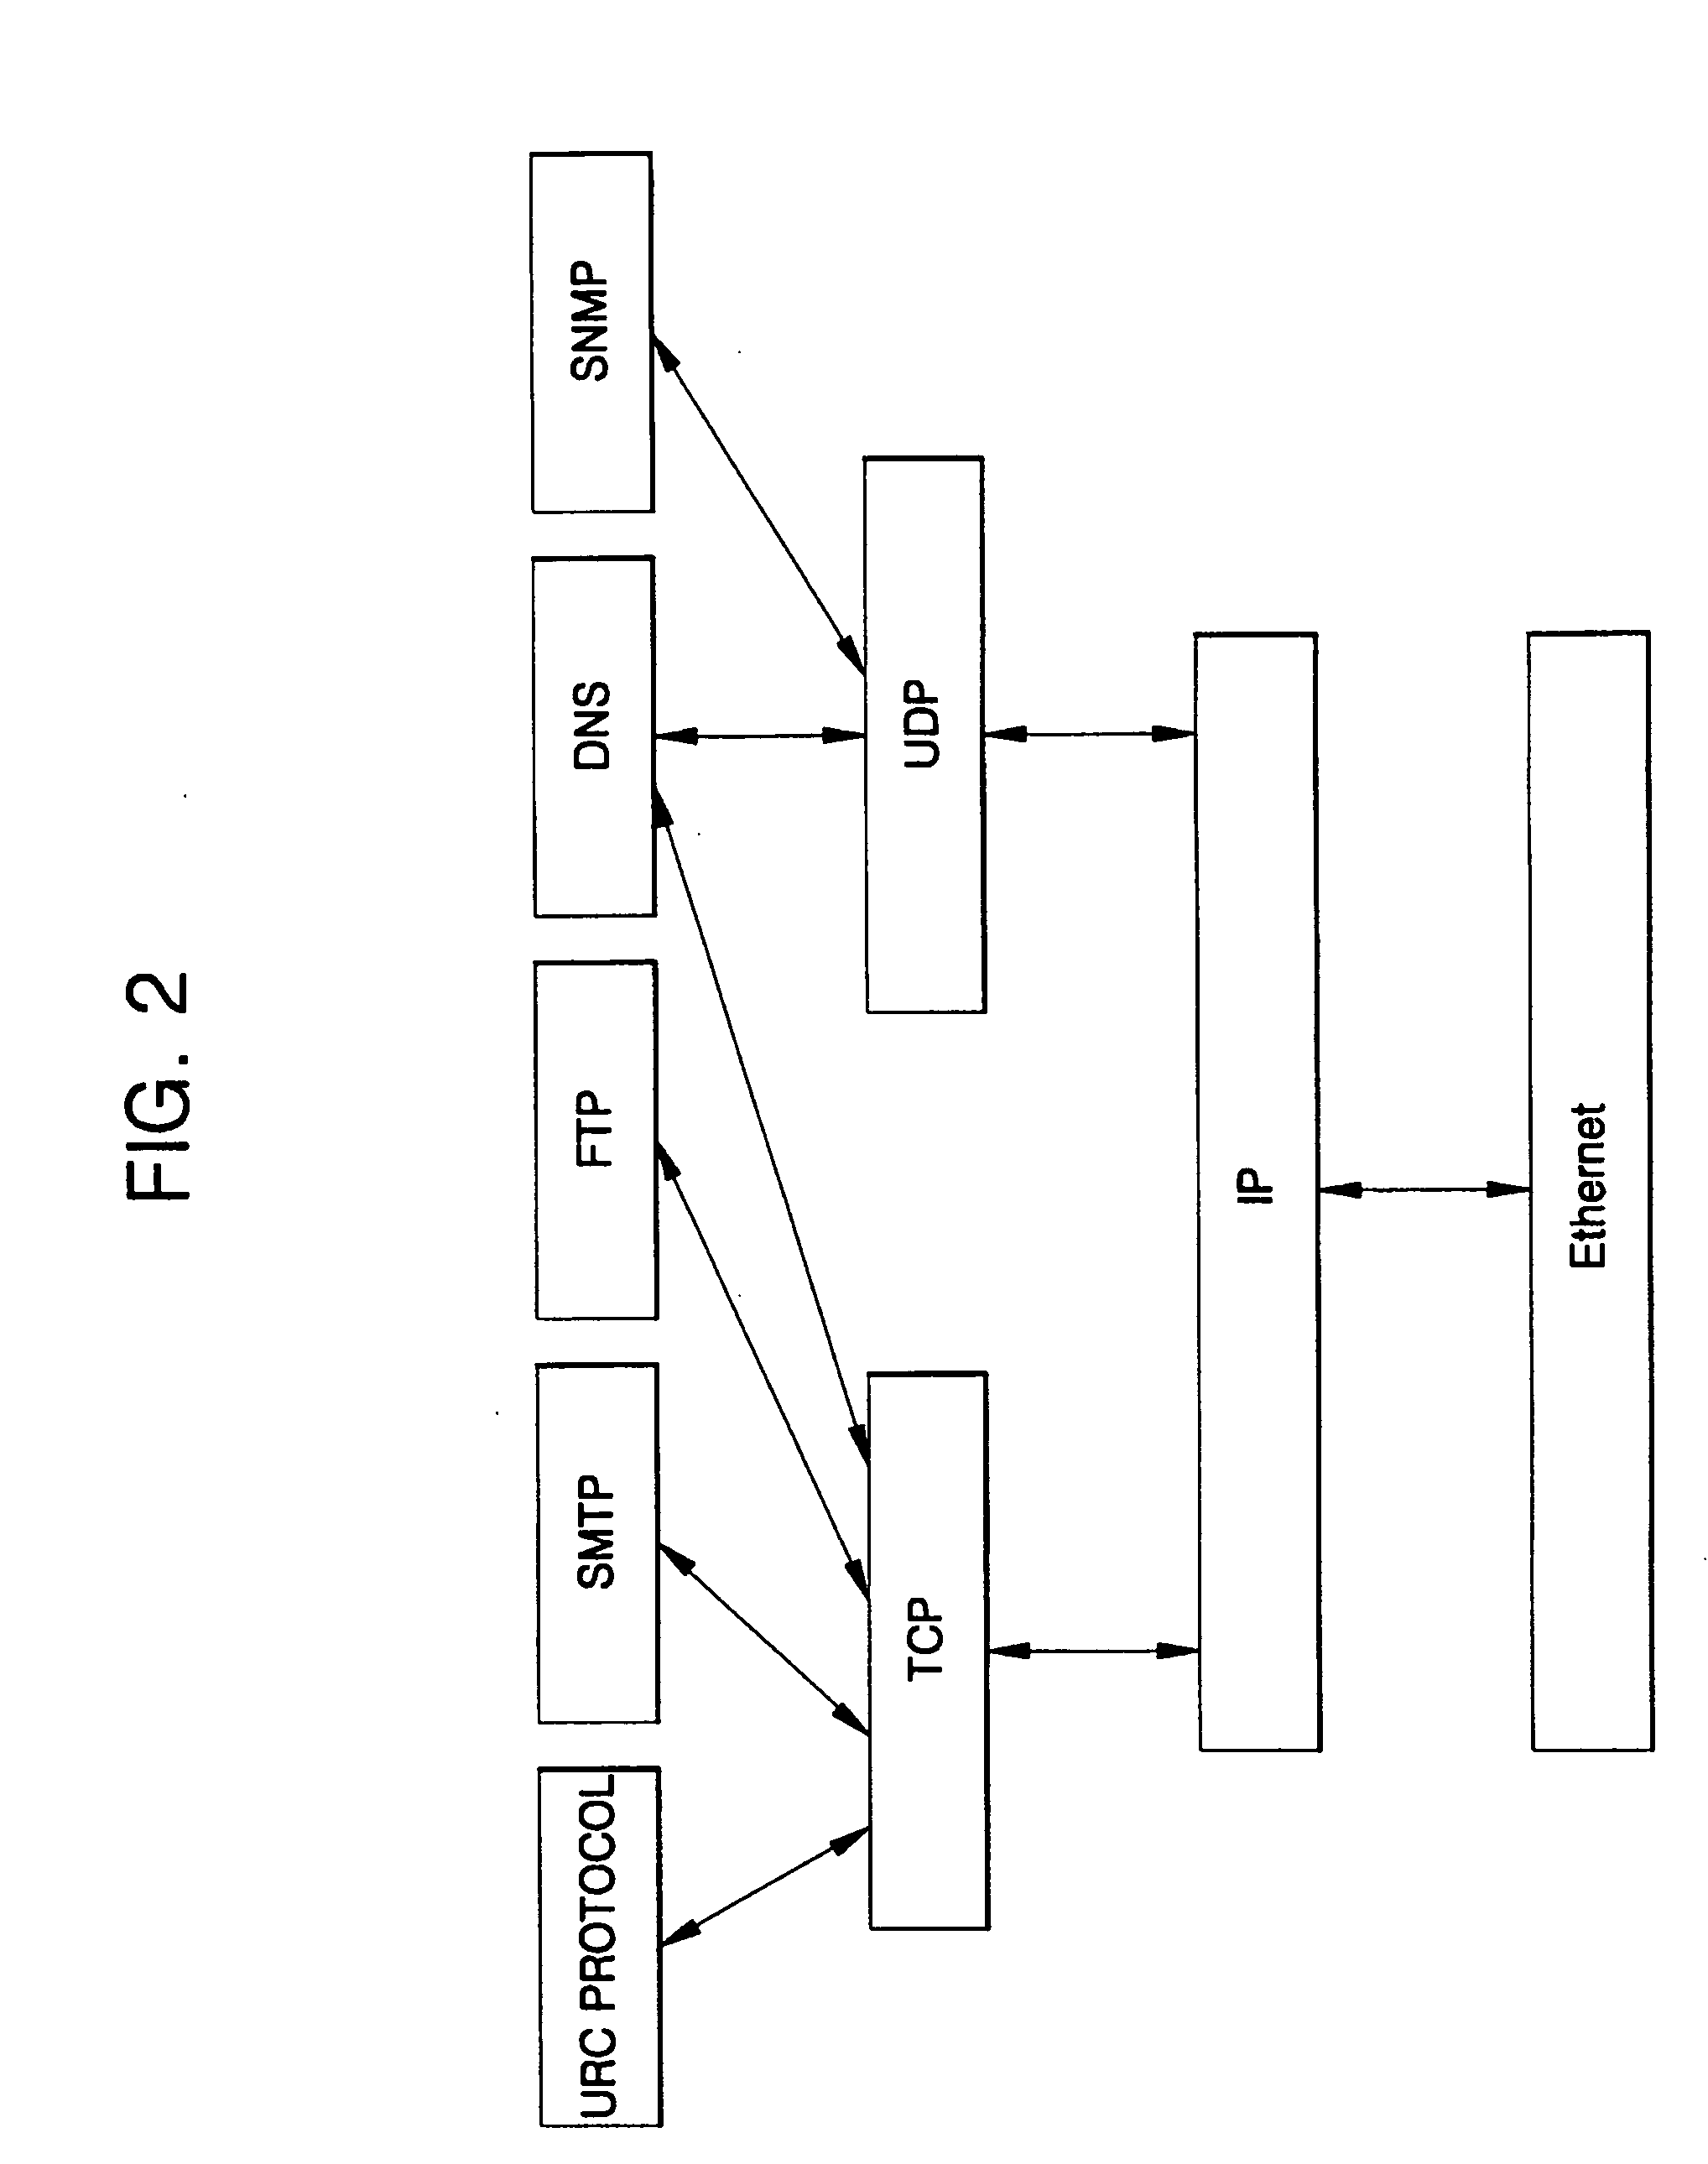 Terminal data format and a communication control system and method using the terminal data format